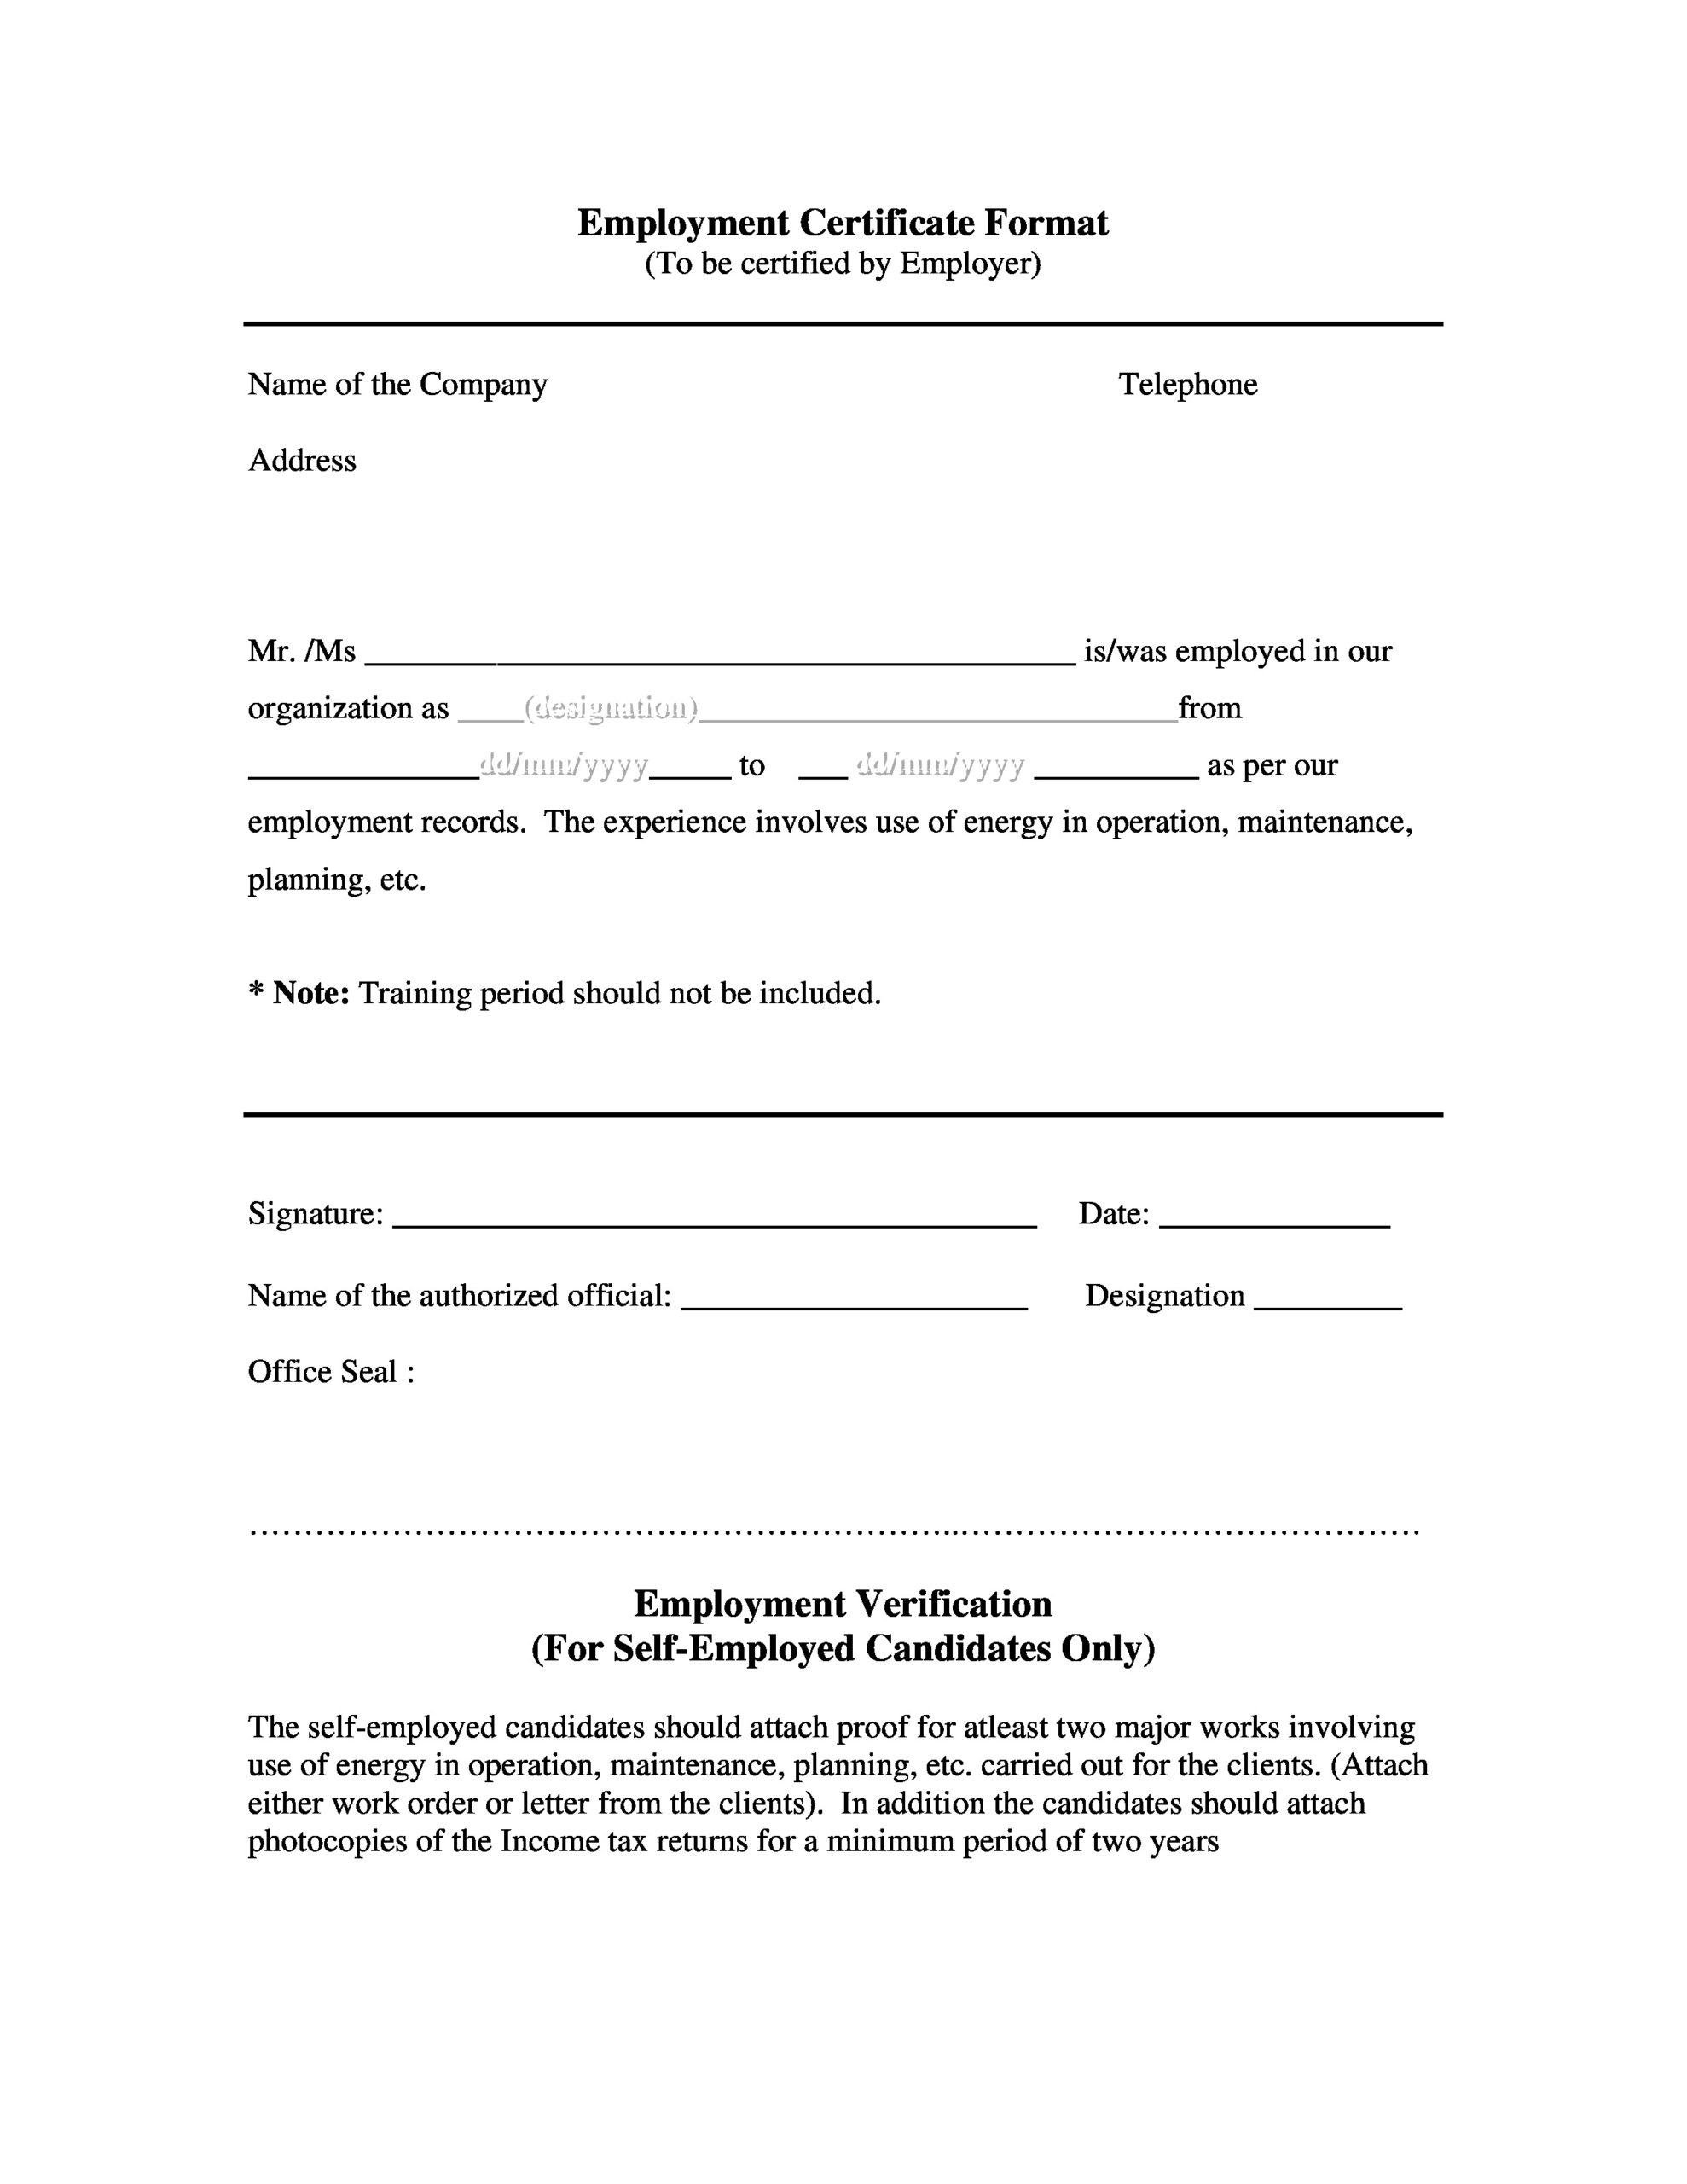 Certificate Of Employment Template.pdf